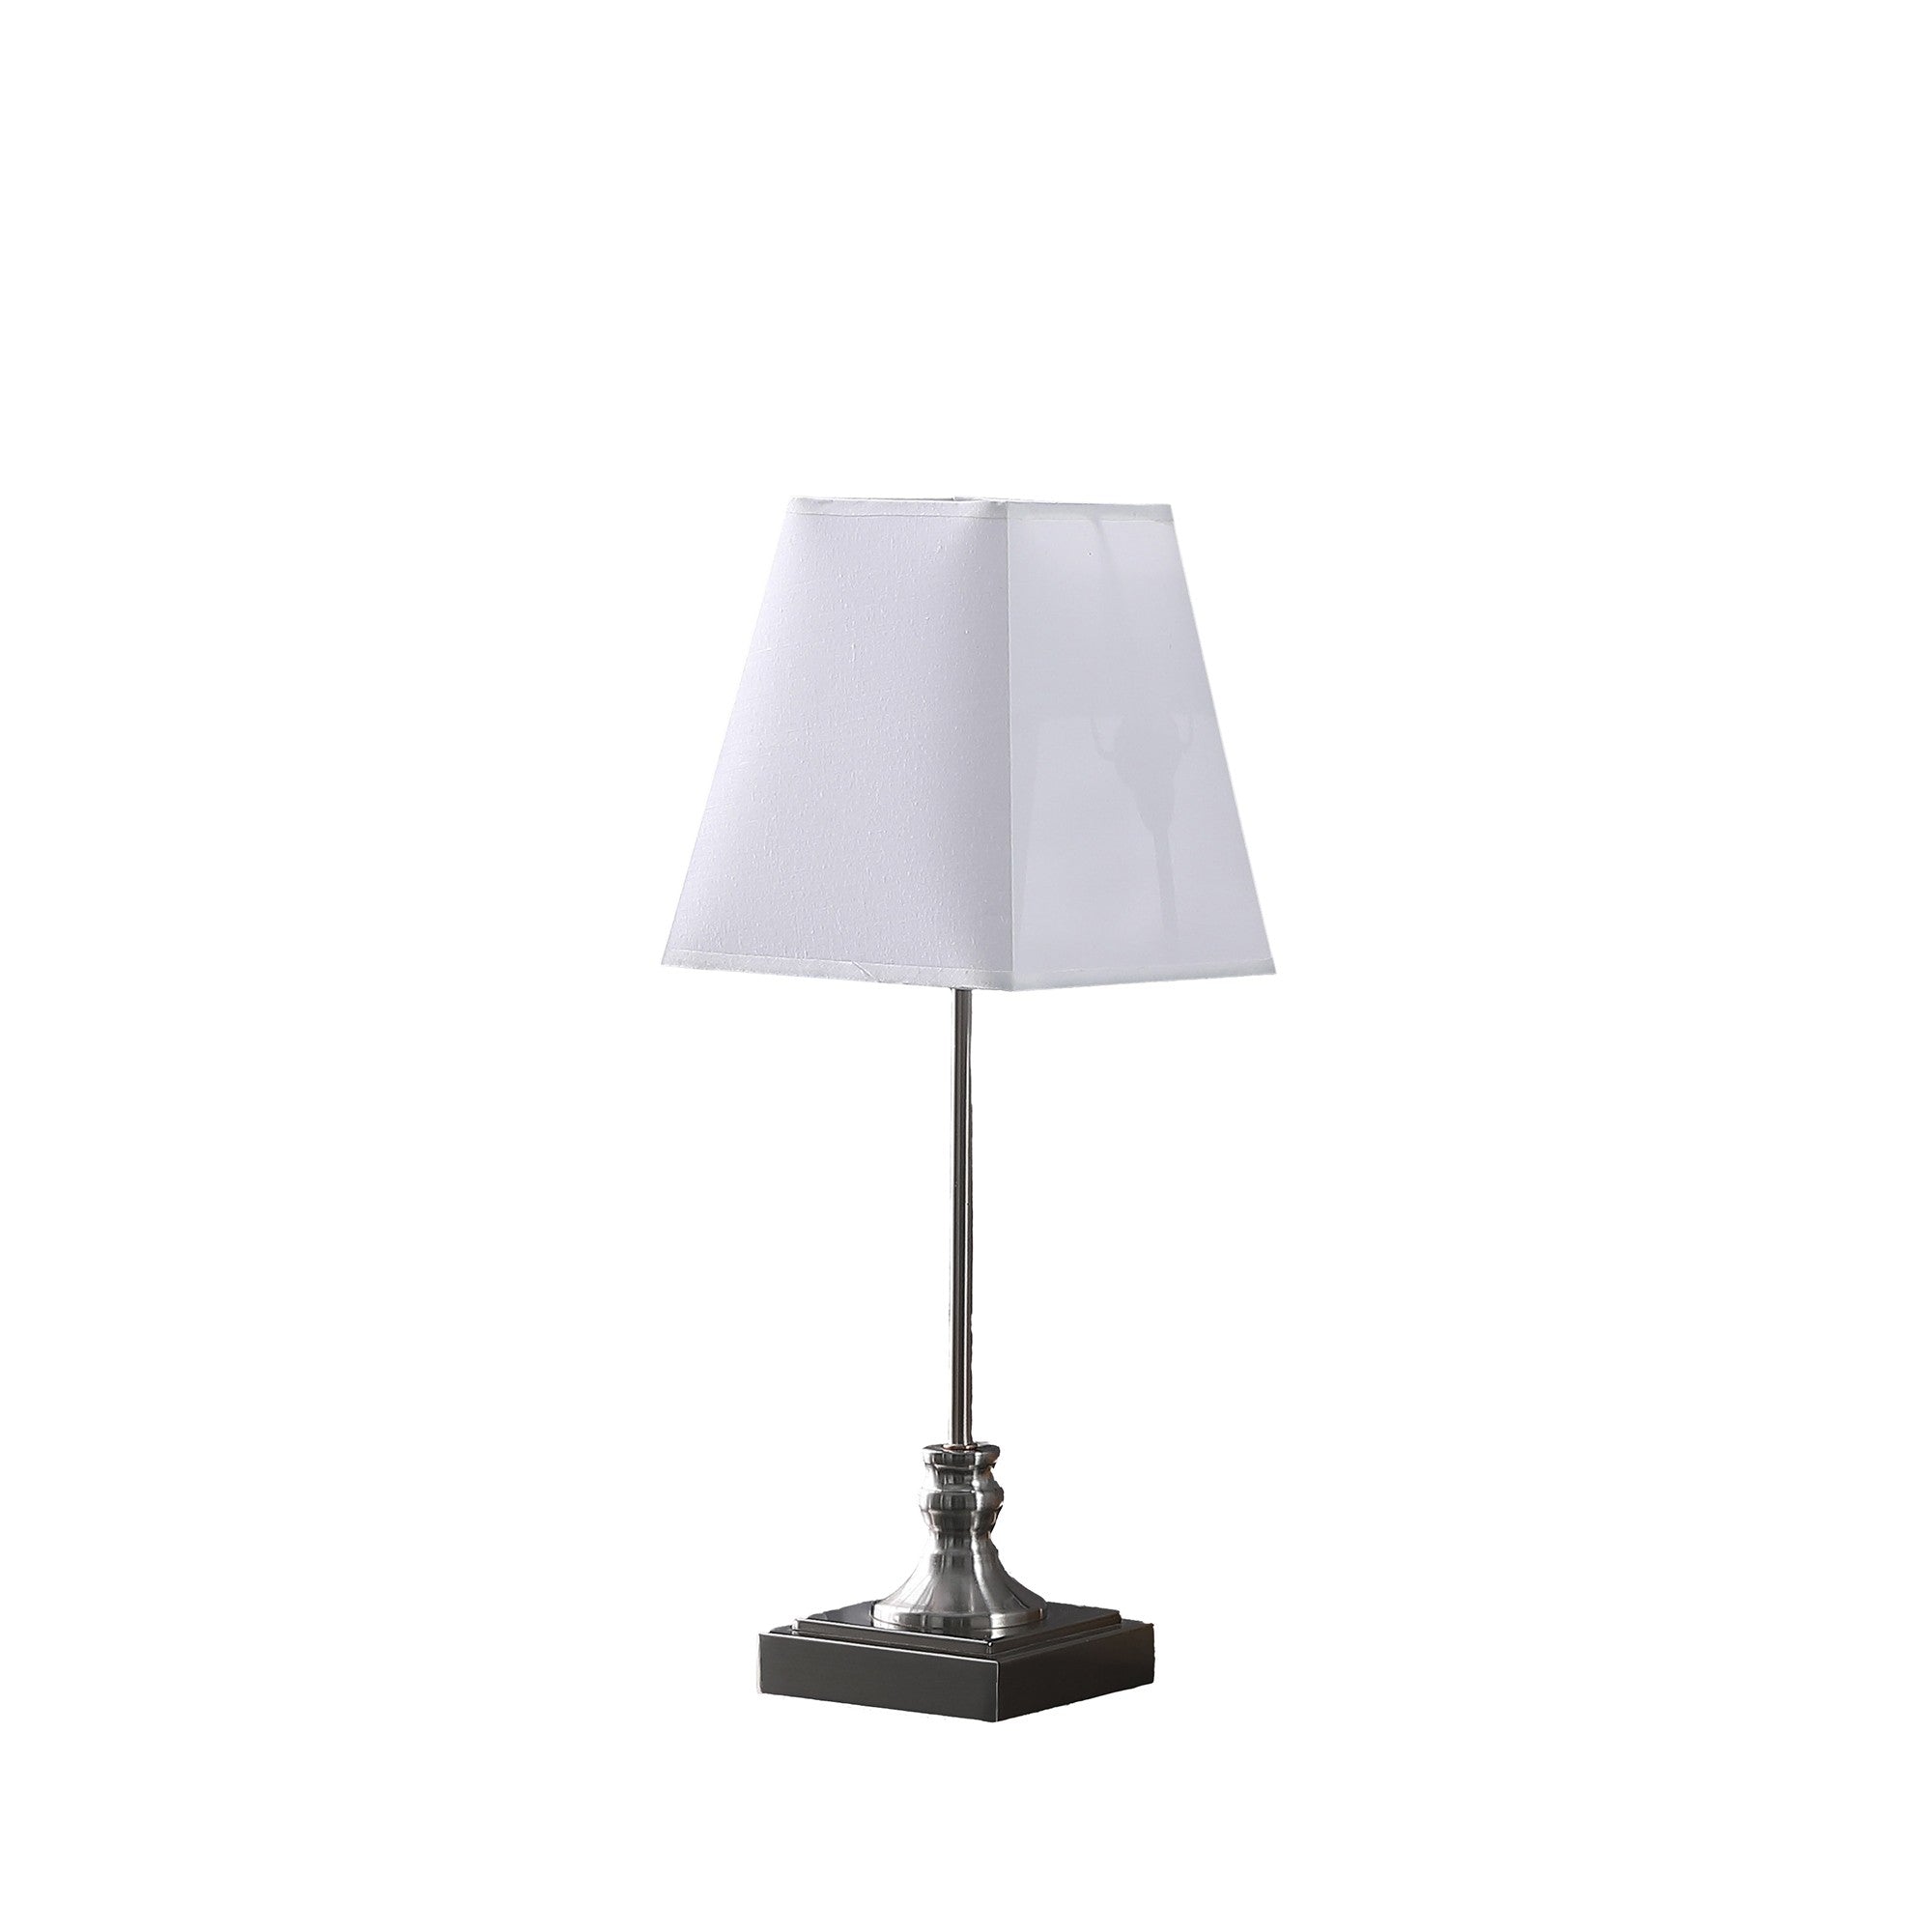 19" Silver Bedside Table Lamp With White Empire Shade